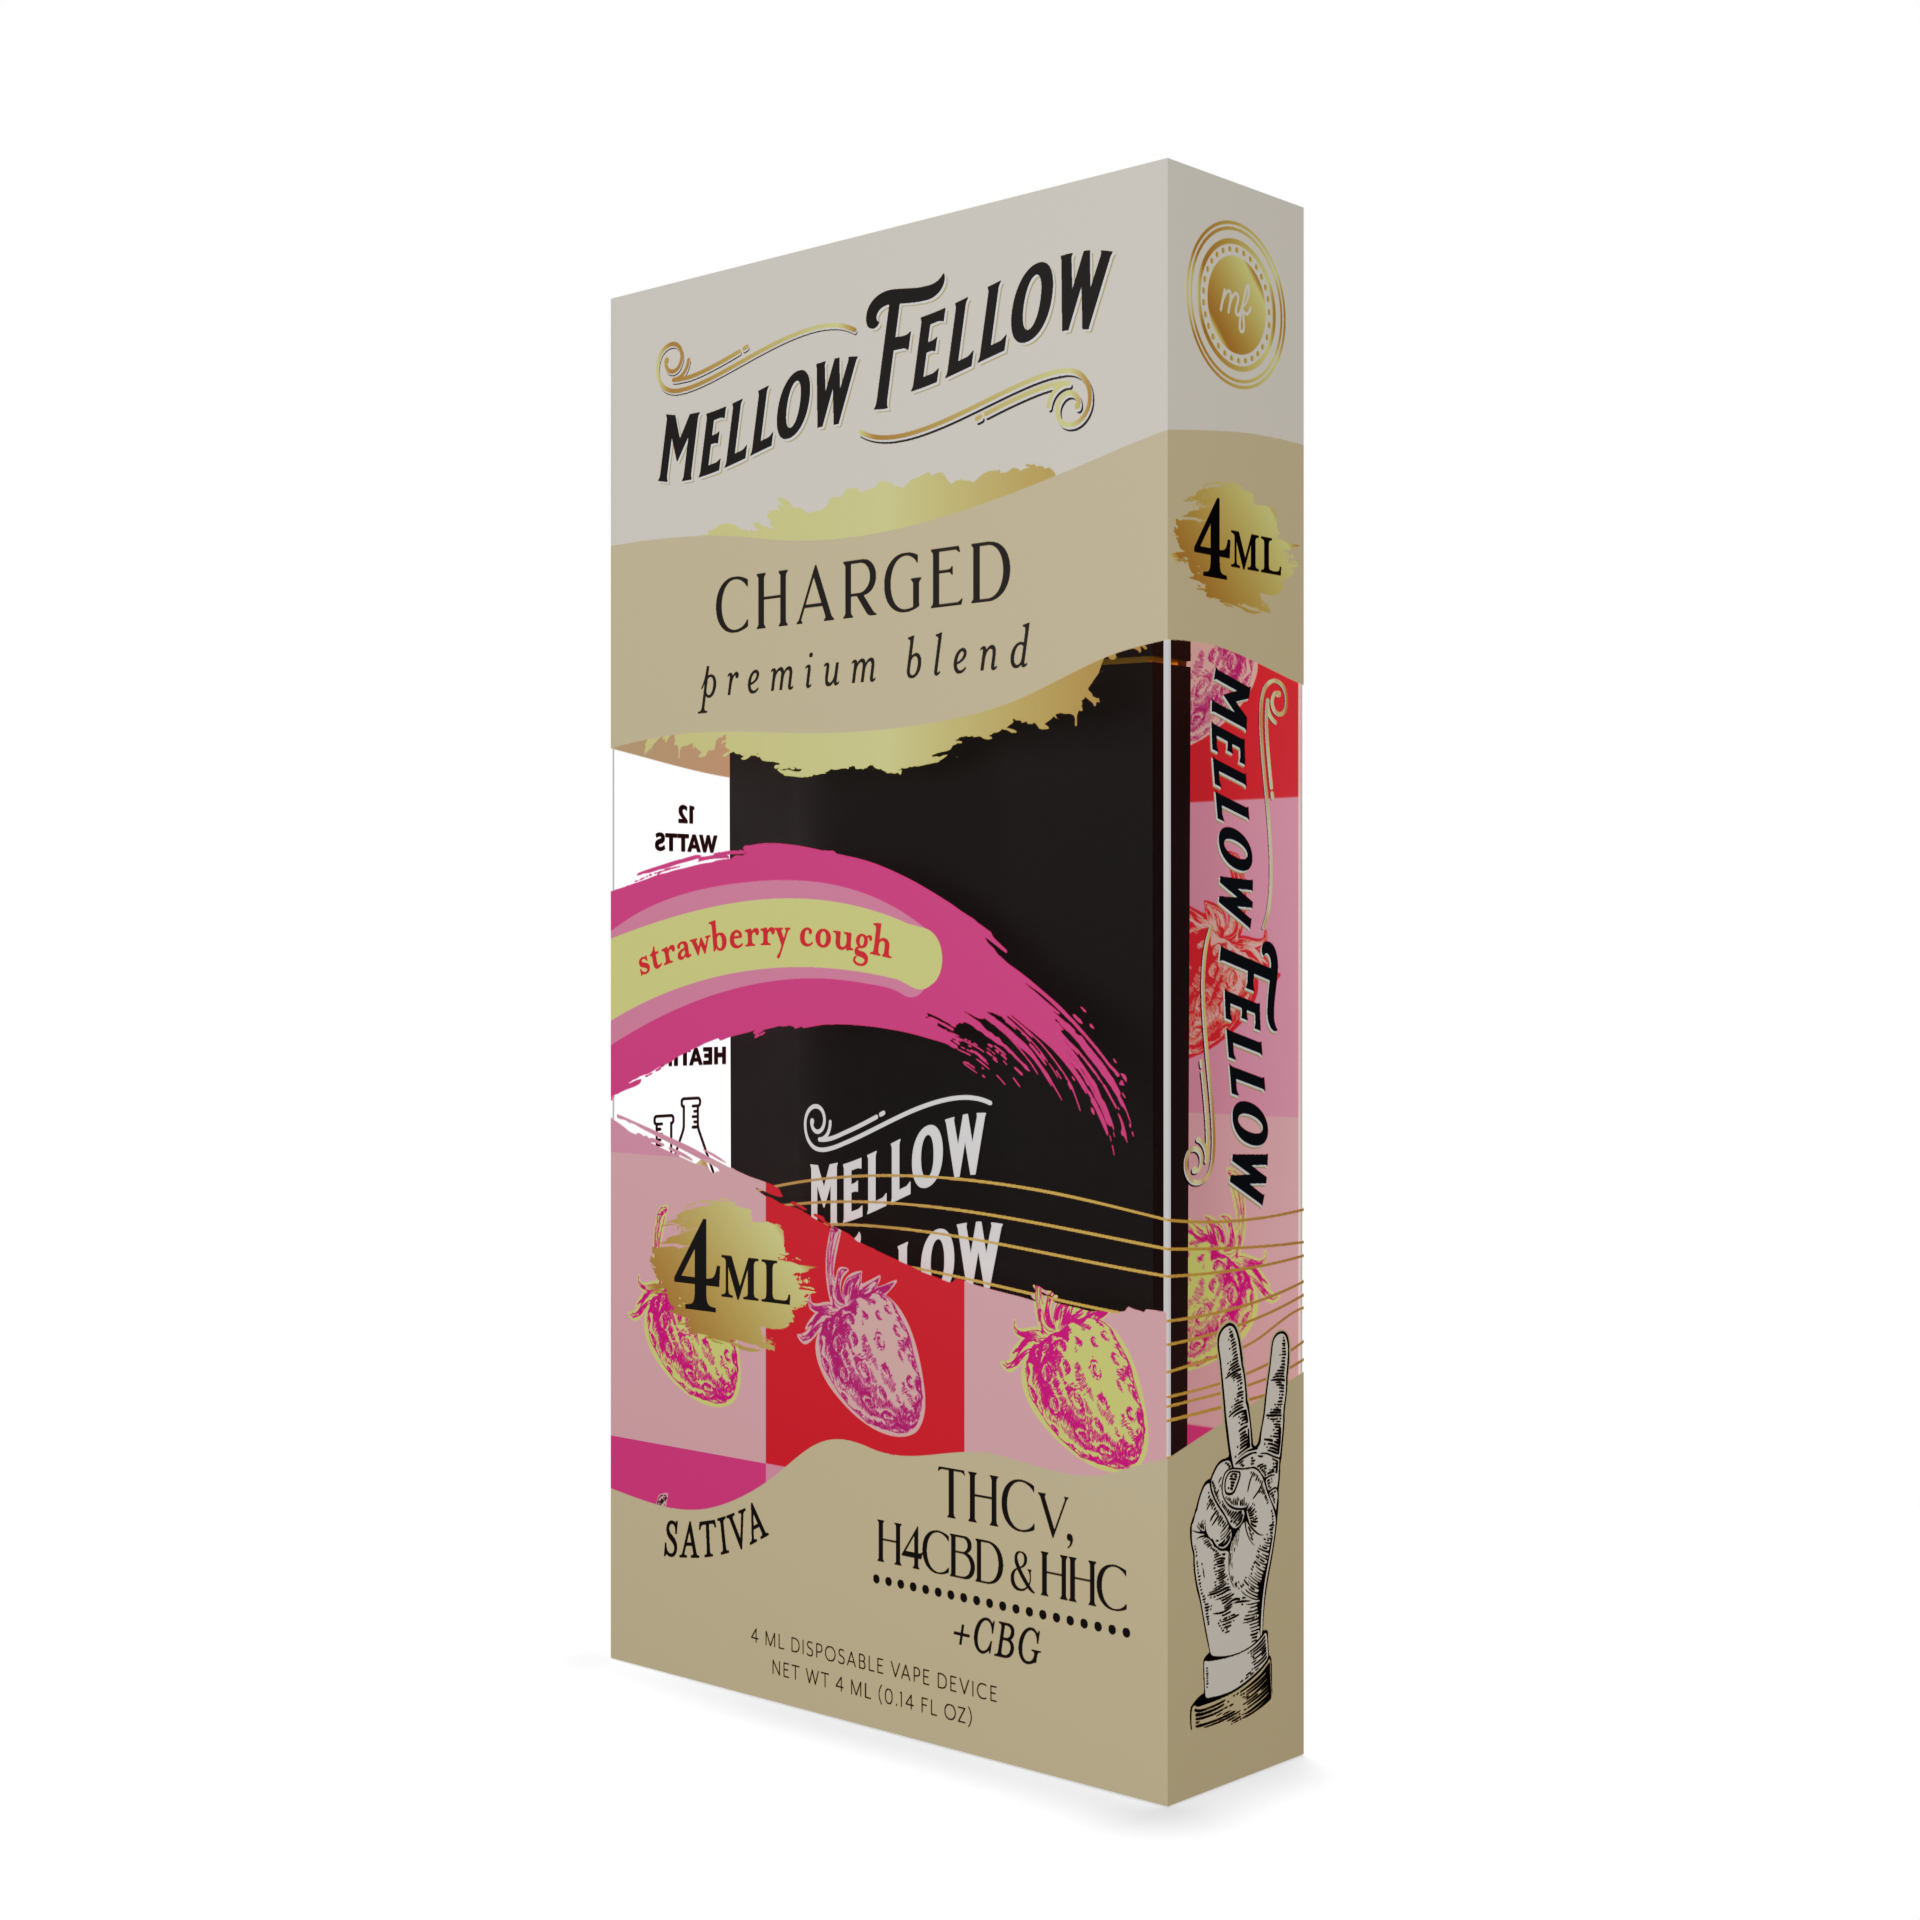 Mellow Fellow Charged Blend 4ML Disposable Vape Strawberry Cough Best Price